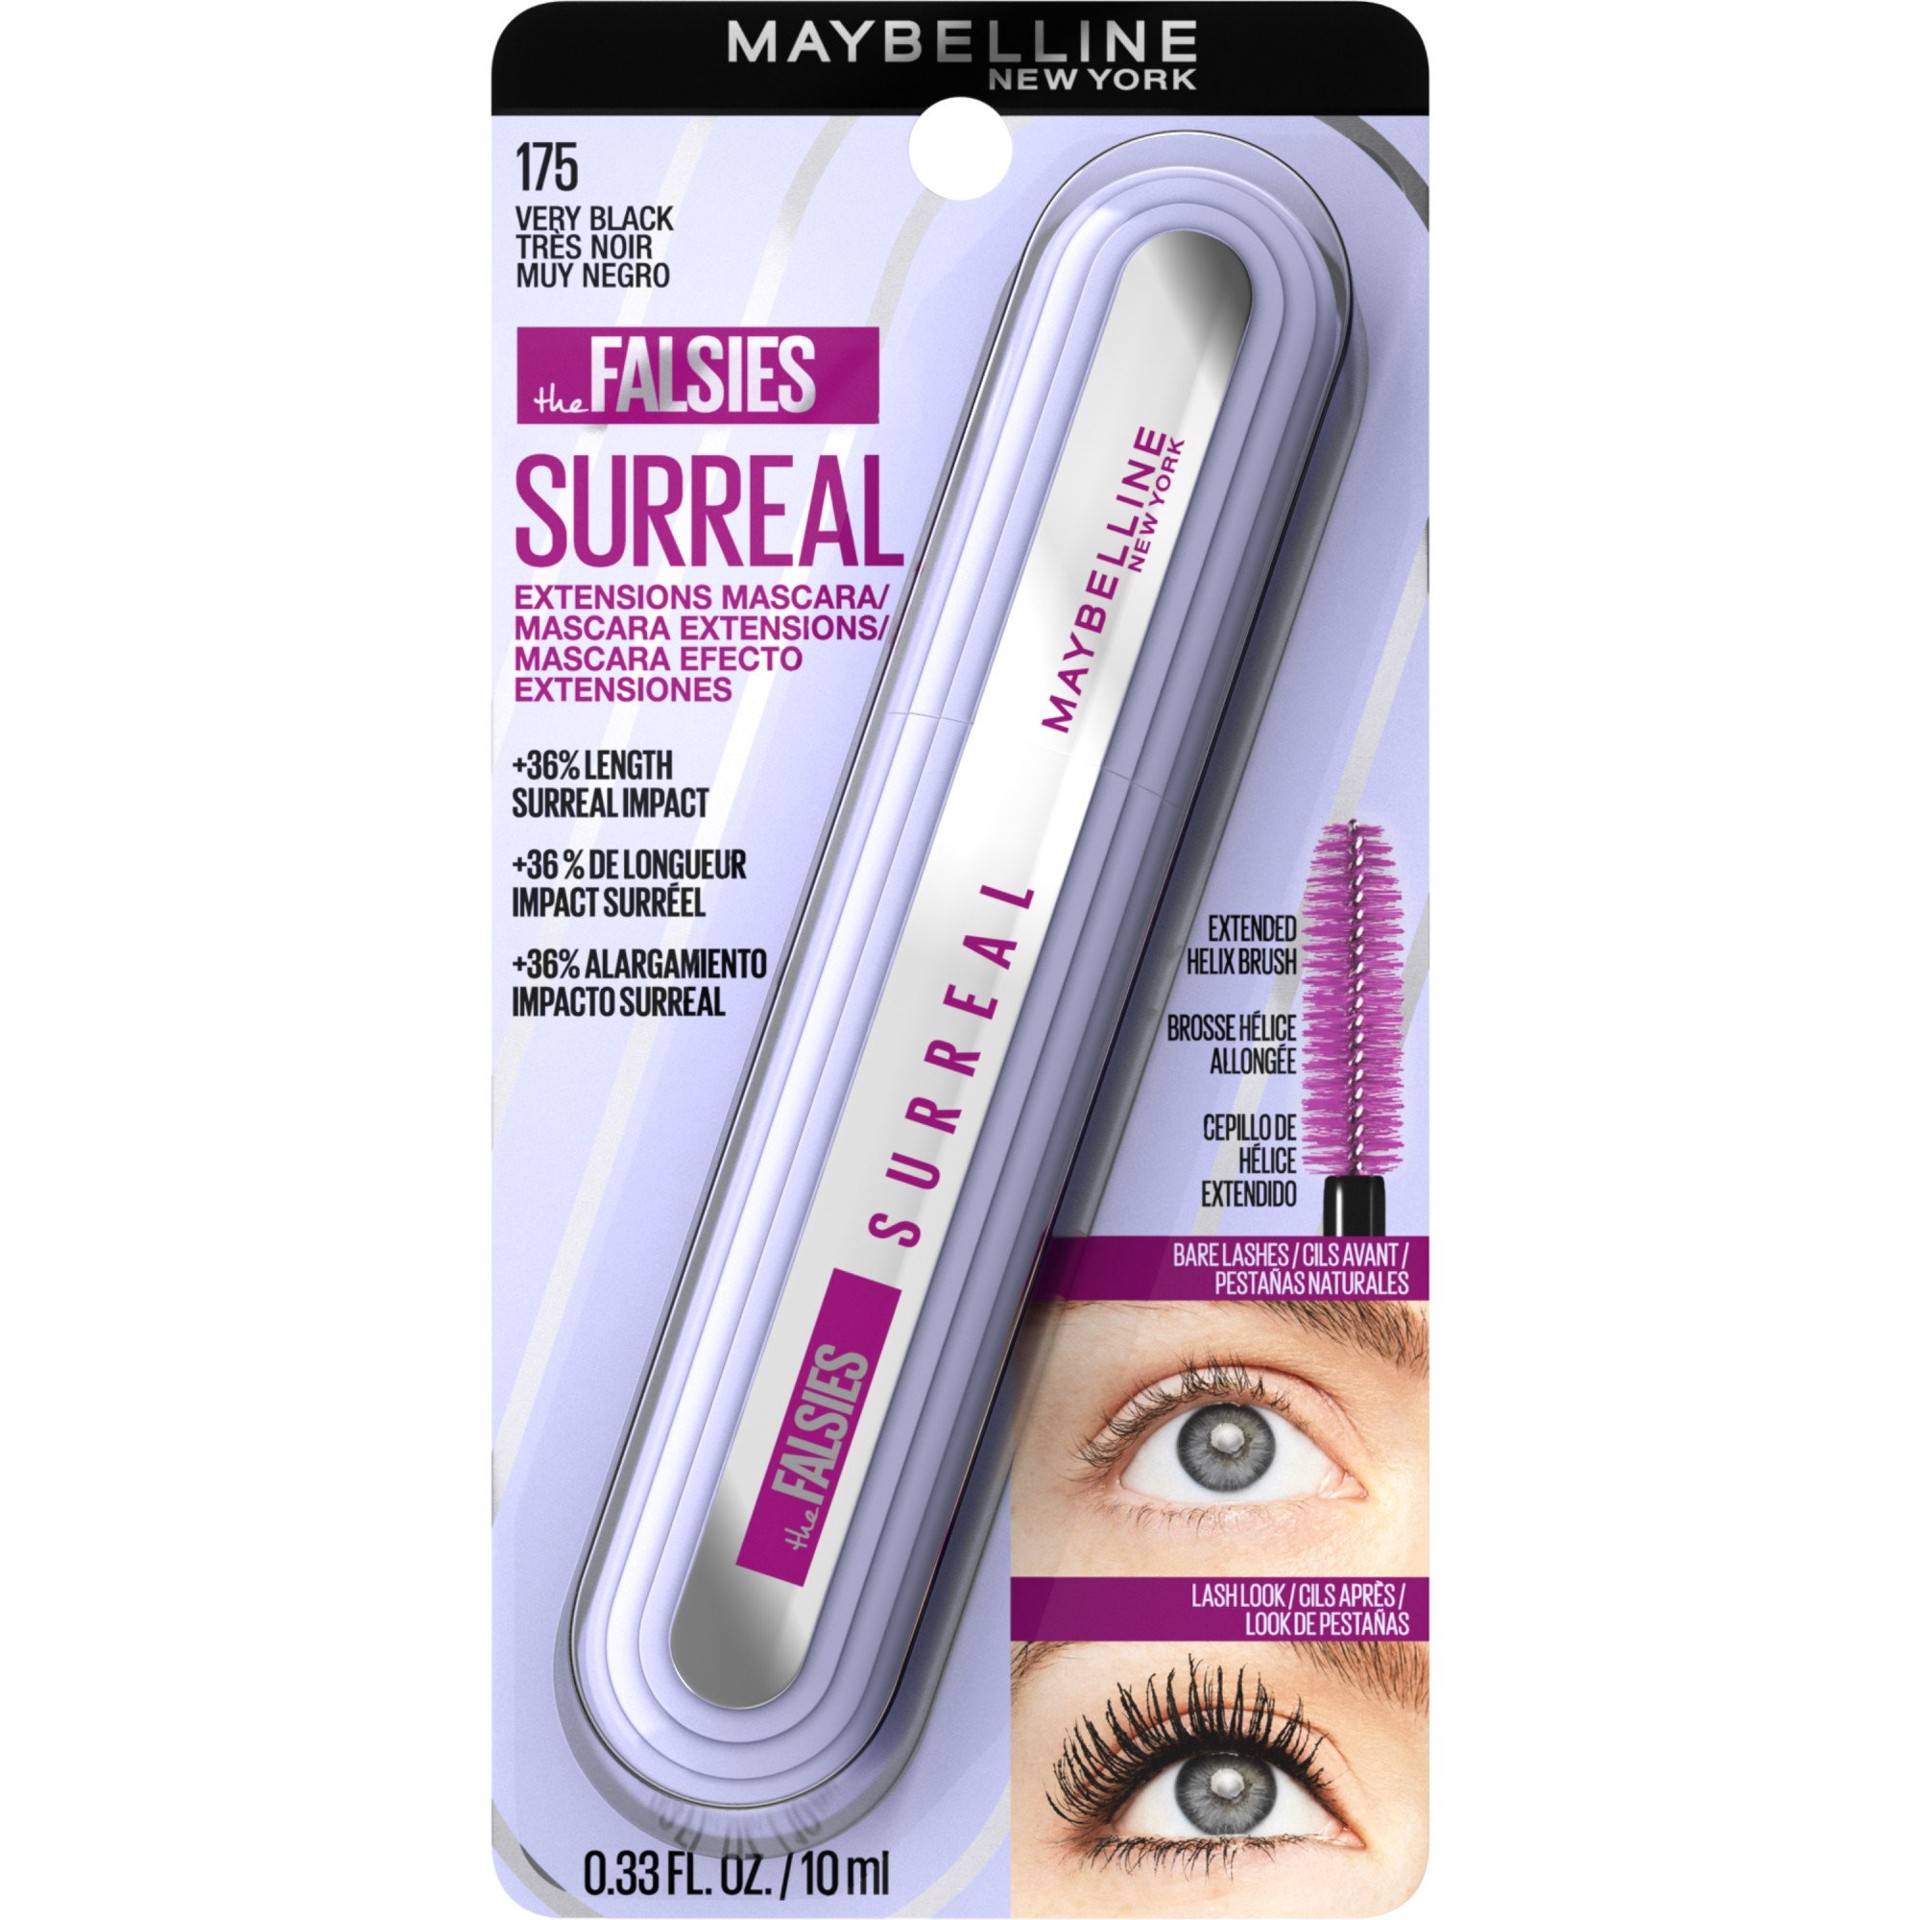 Maybelline The Falsies Surreal Mascara Very Black 1 Ct Shipt 8118